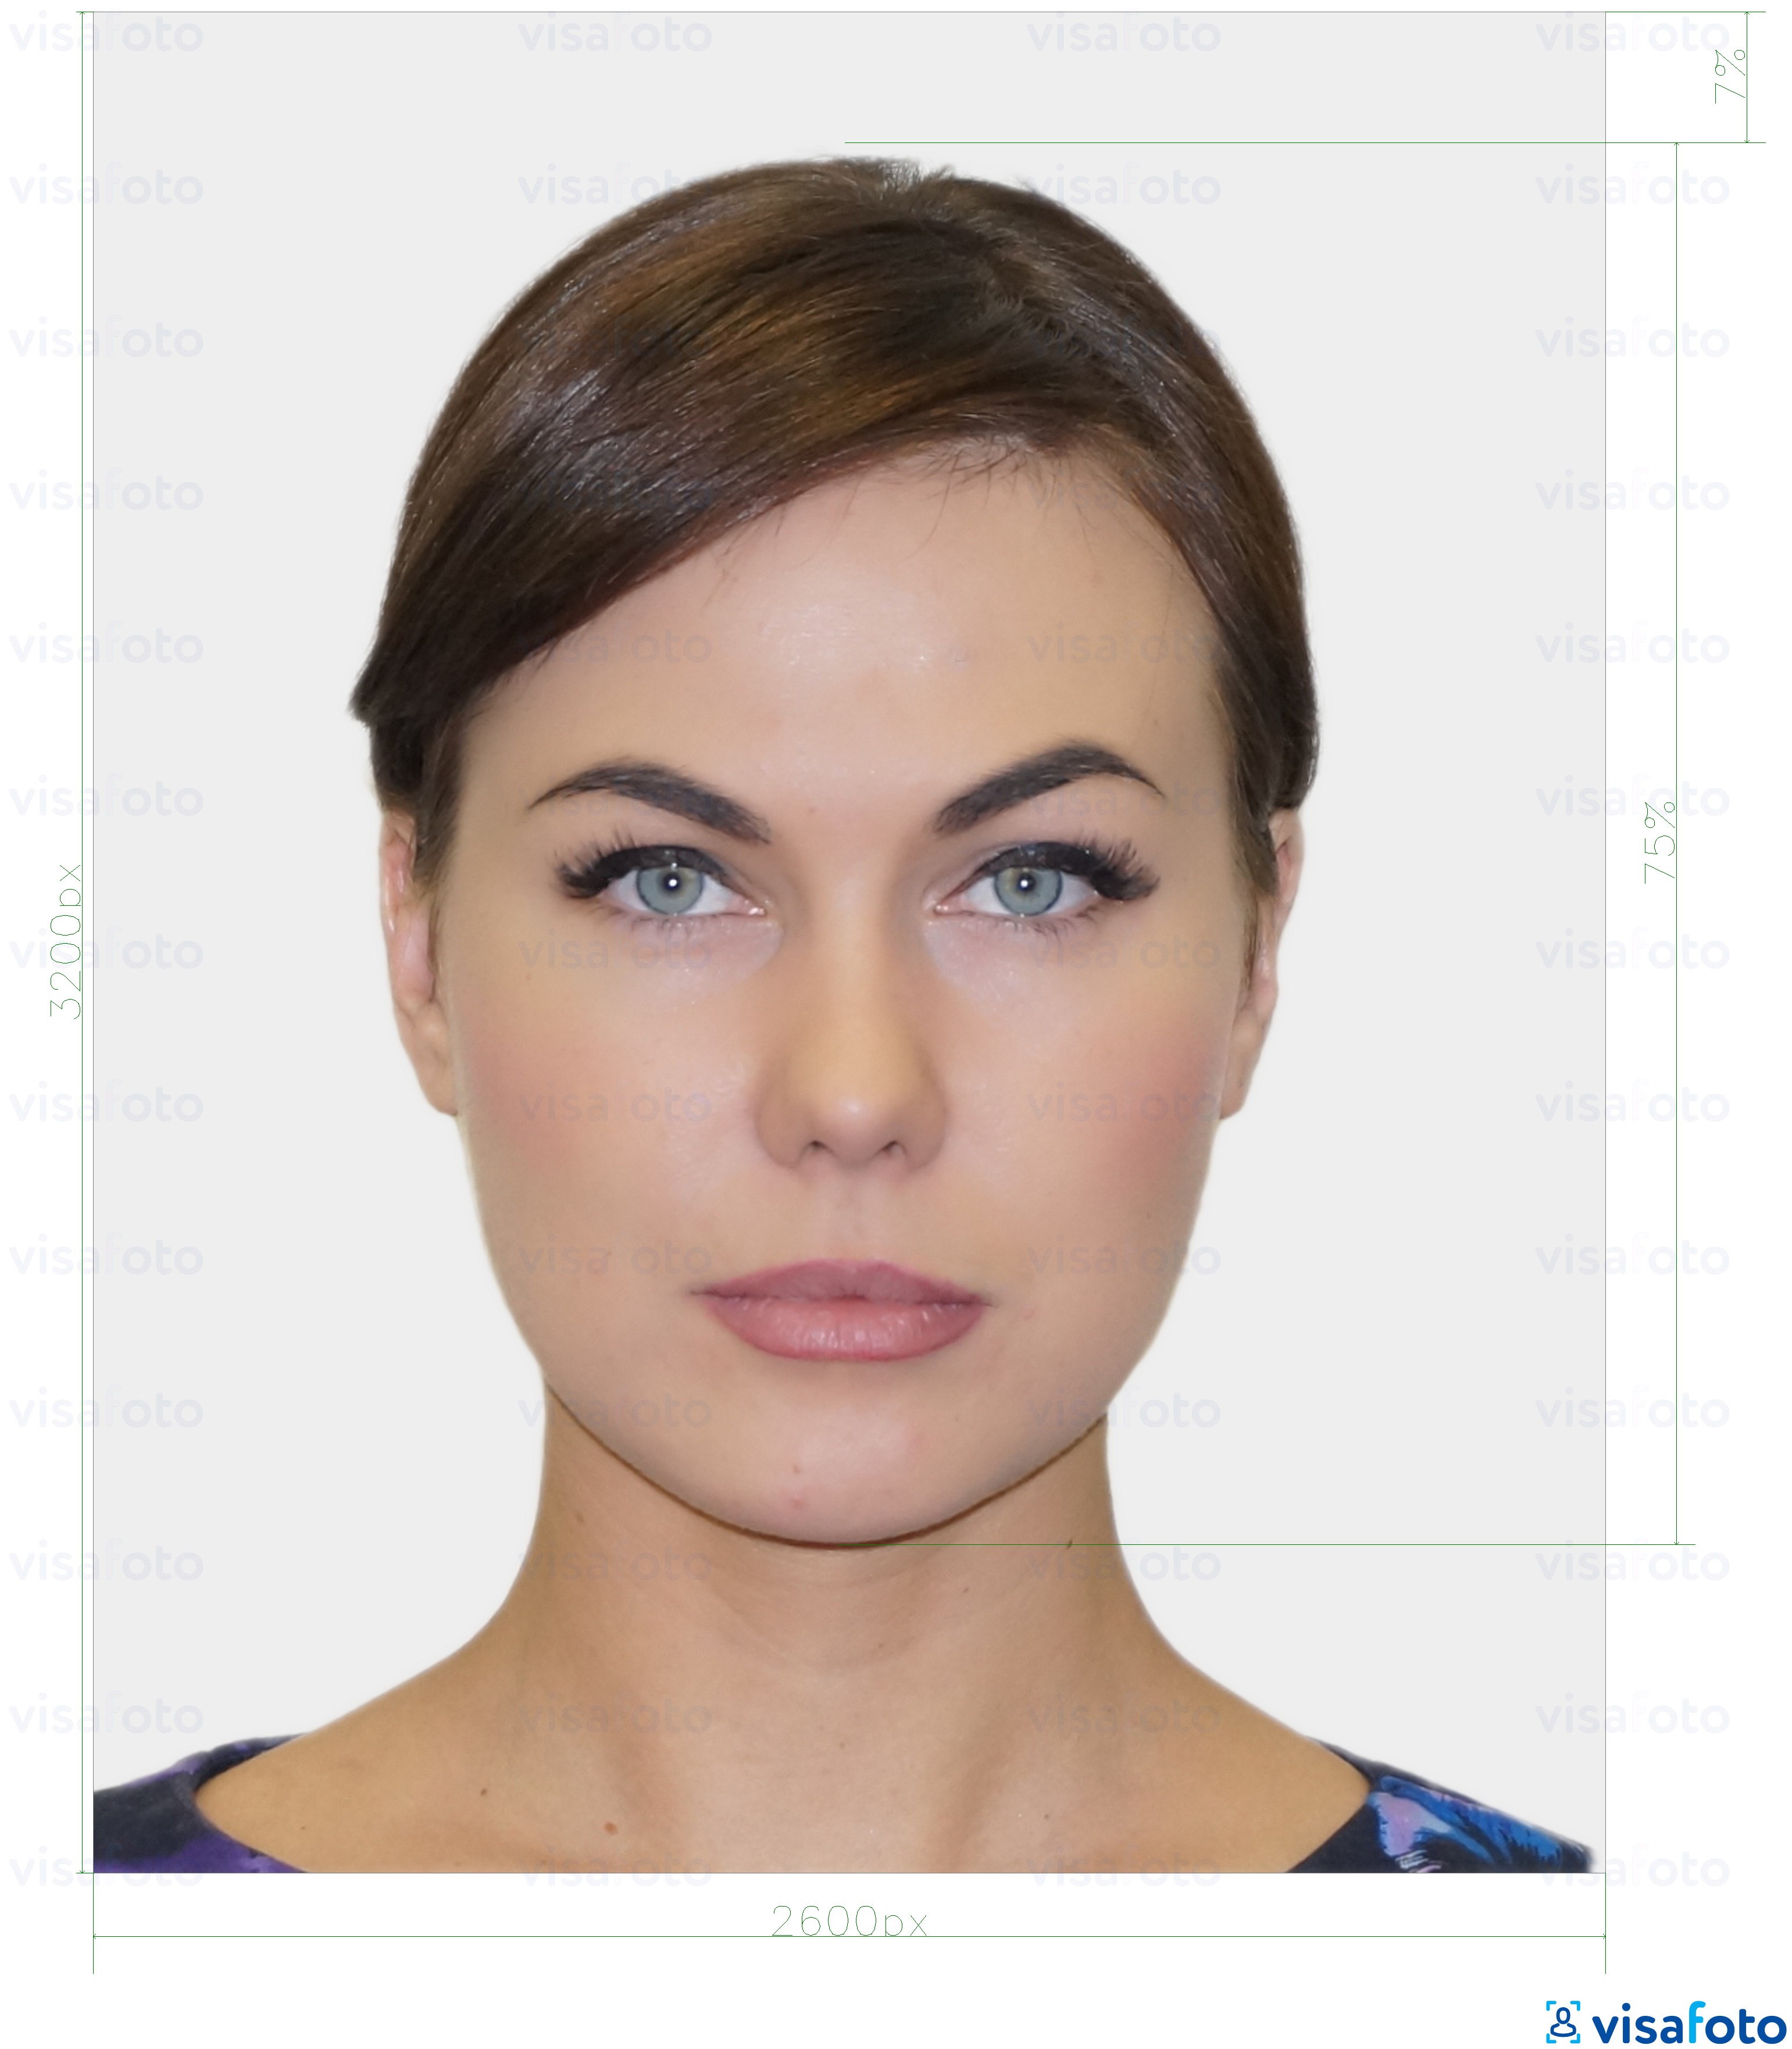 Example of photo for Estonia resident digital identity card 1300x1600 pixels with exact size specification